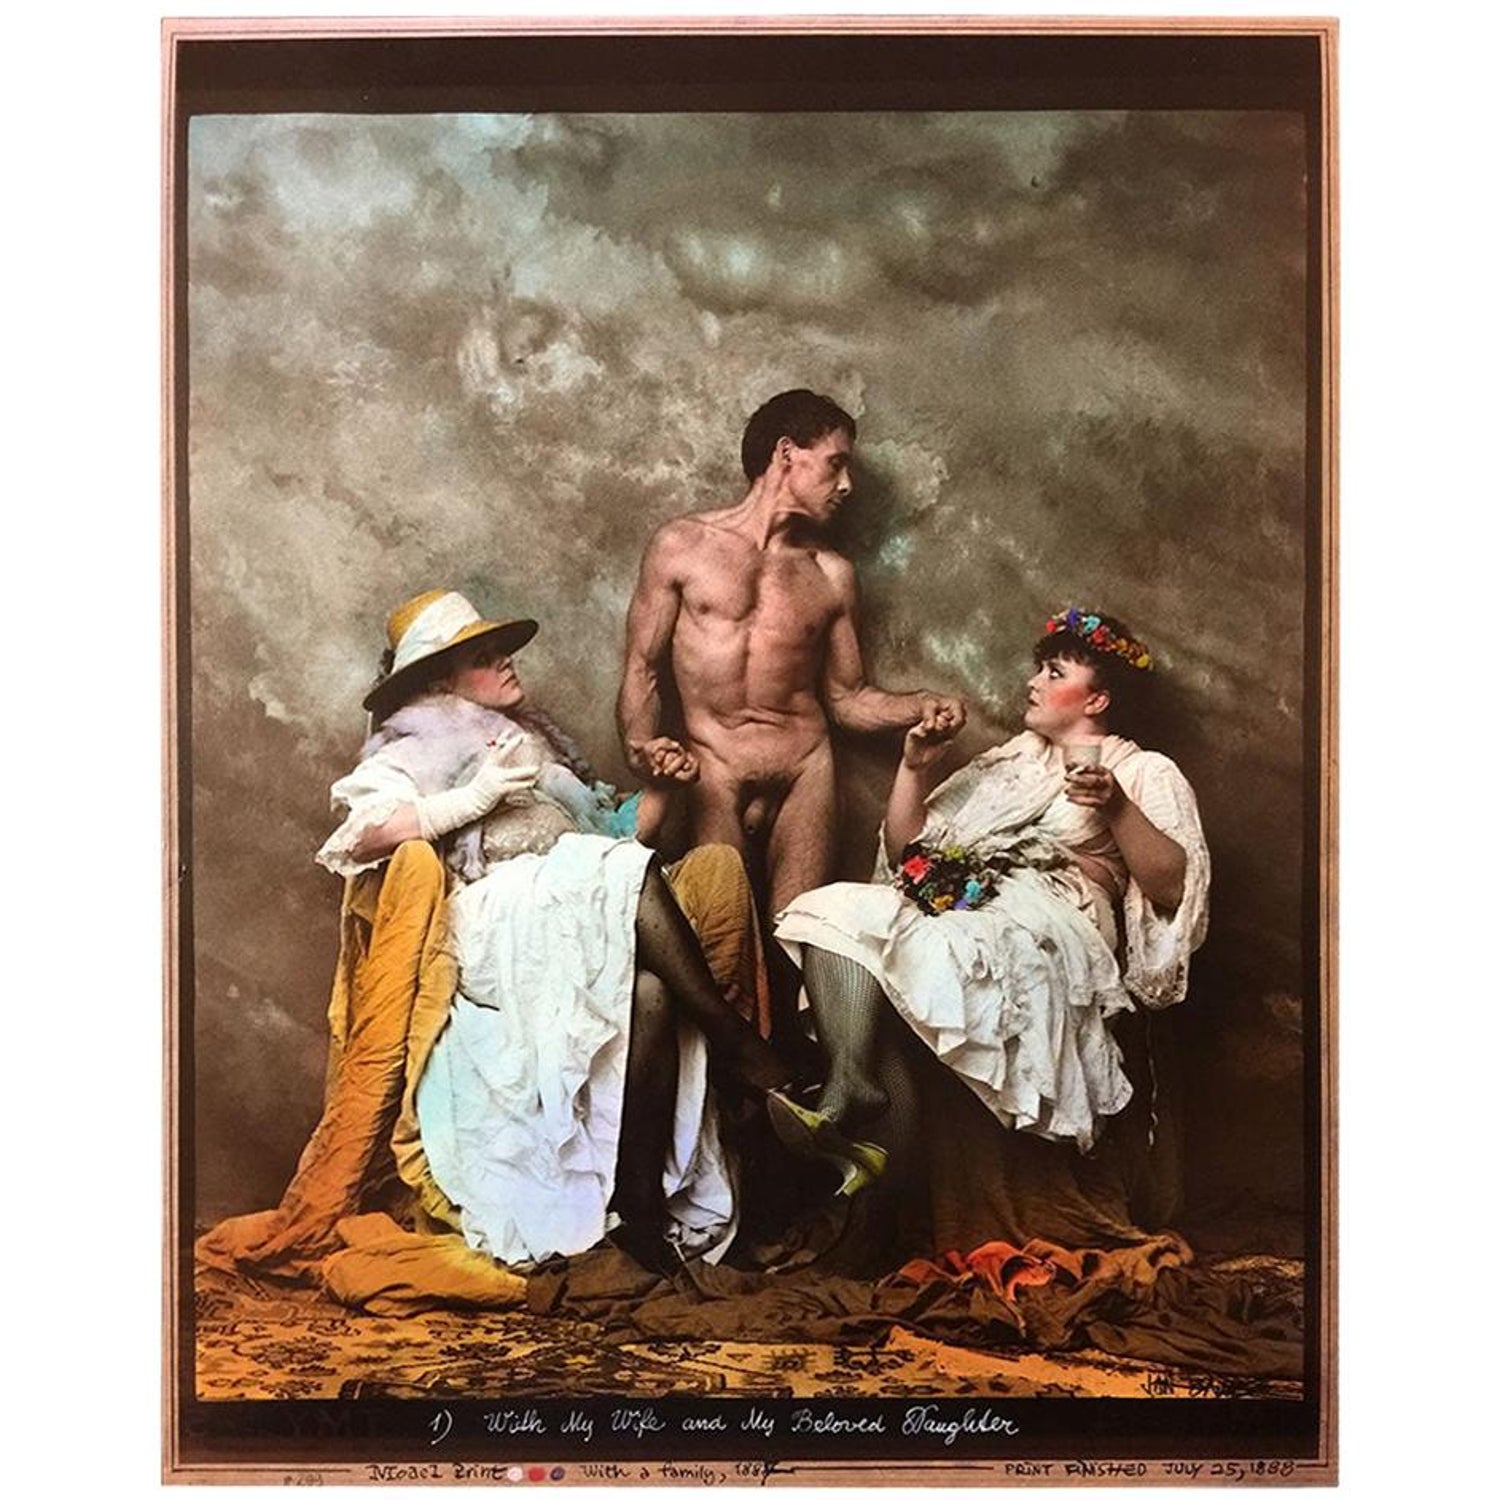 Jan Saudek, Czech Photographer, "With my Wife and My Beloved Daughter" For  Sale at 1stDibs